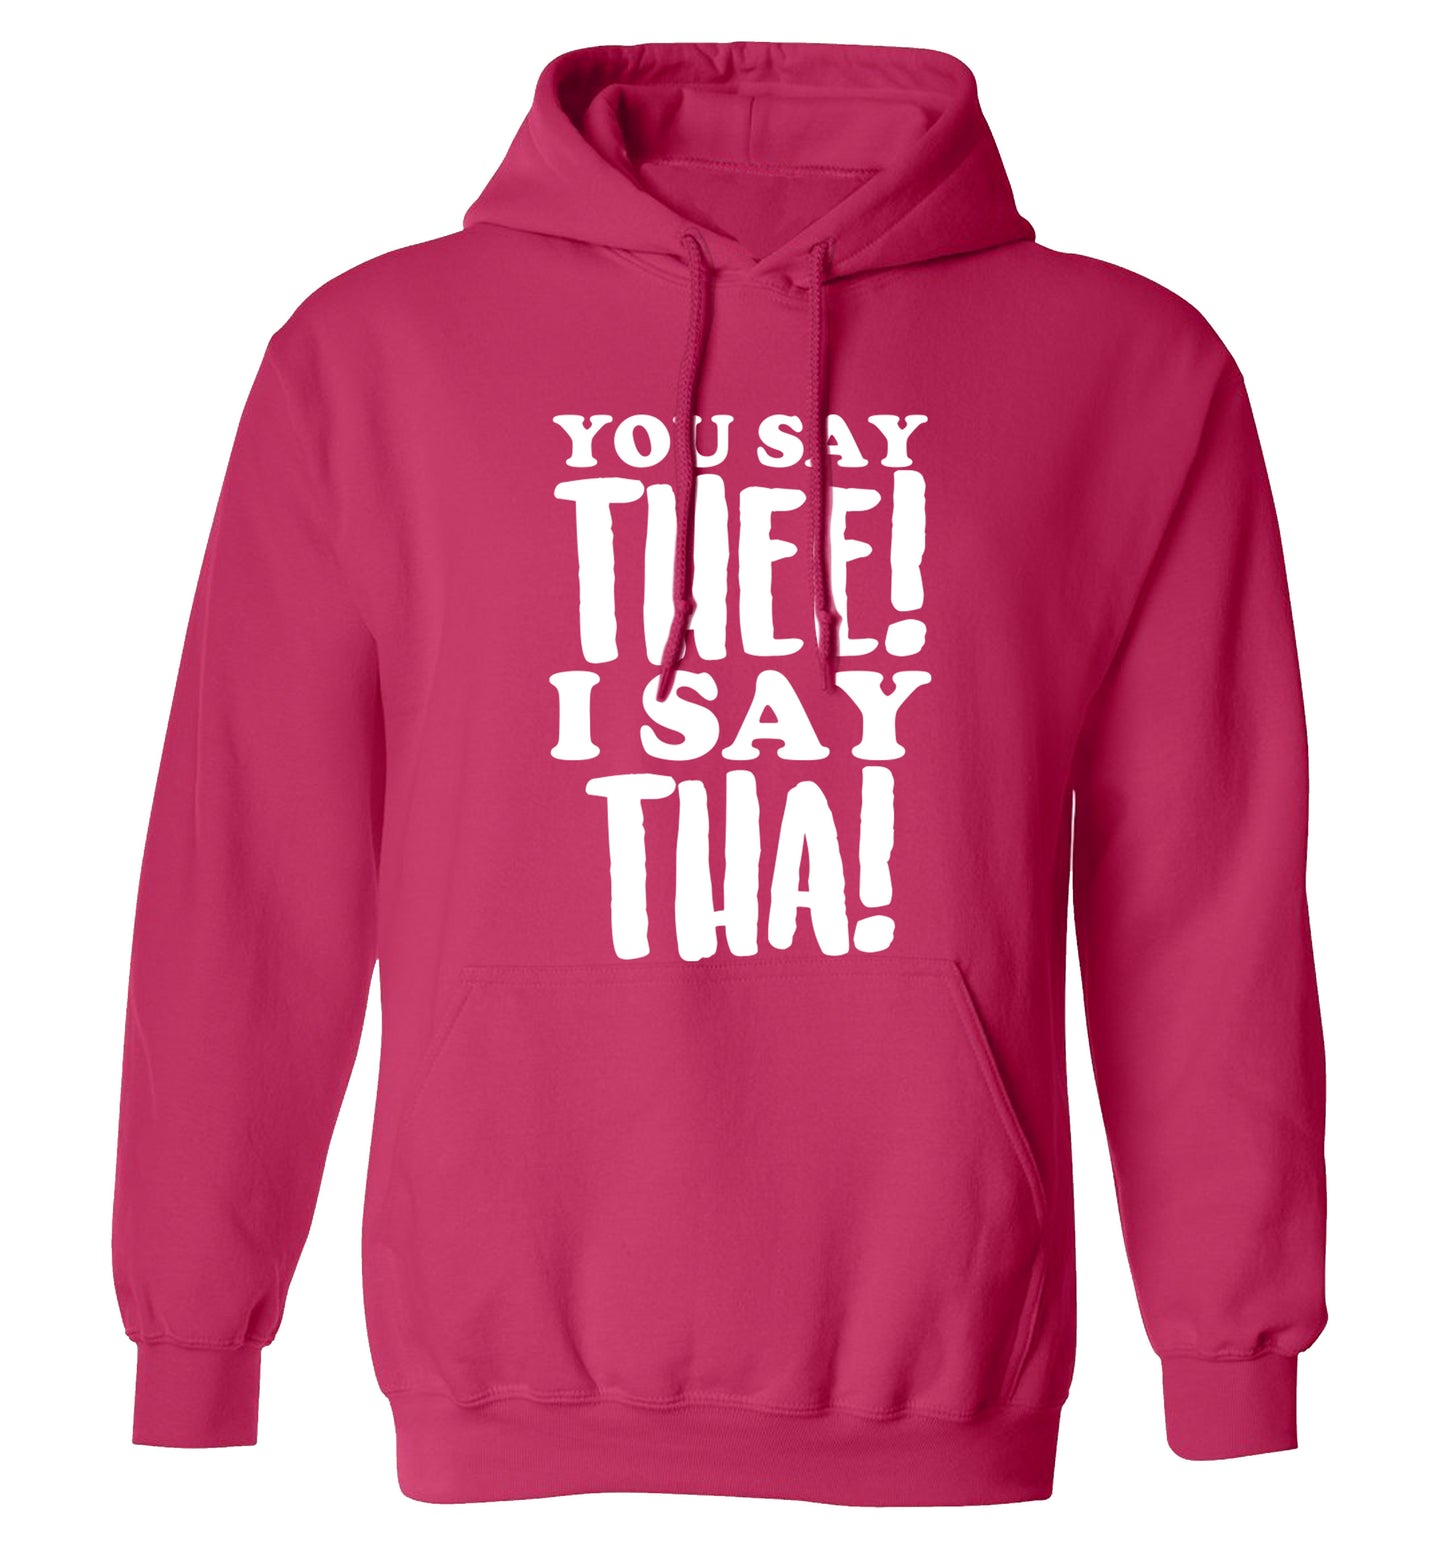 You say thee I say tha adults unisex pink hoodie 2XL